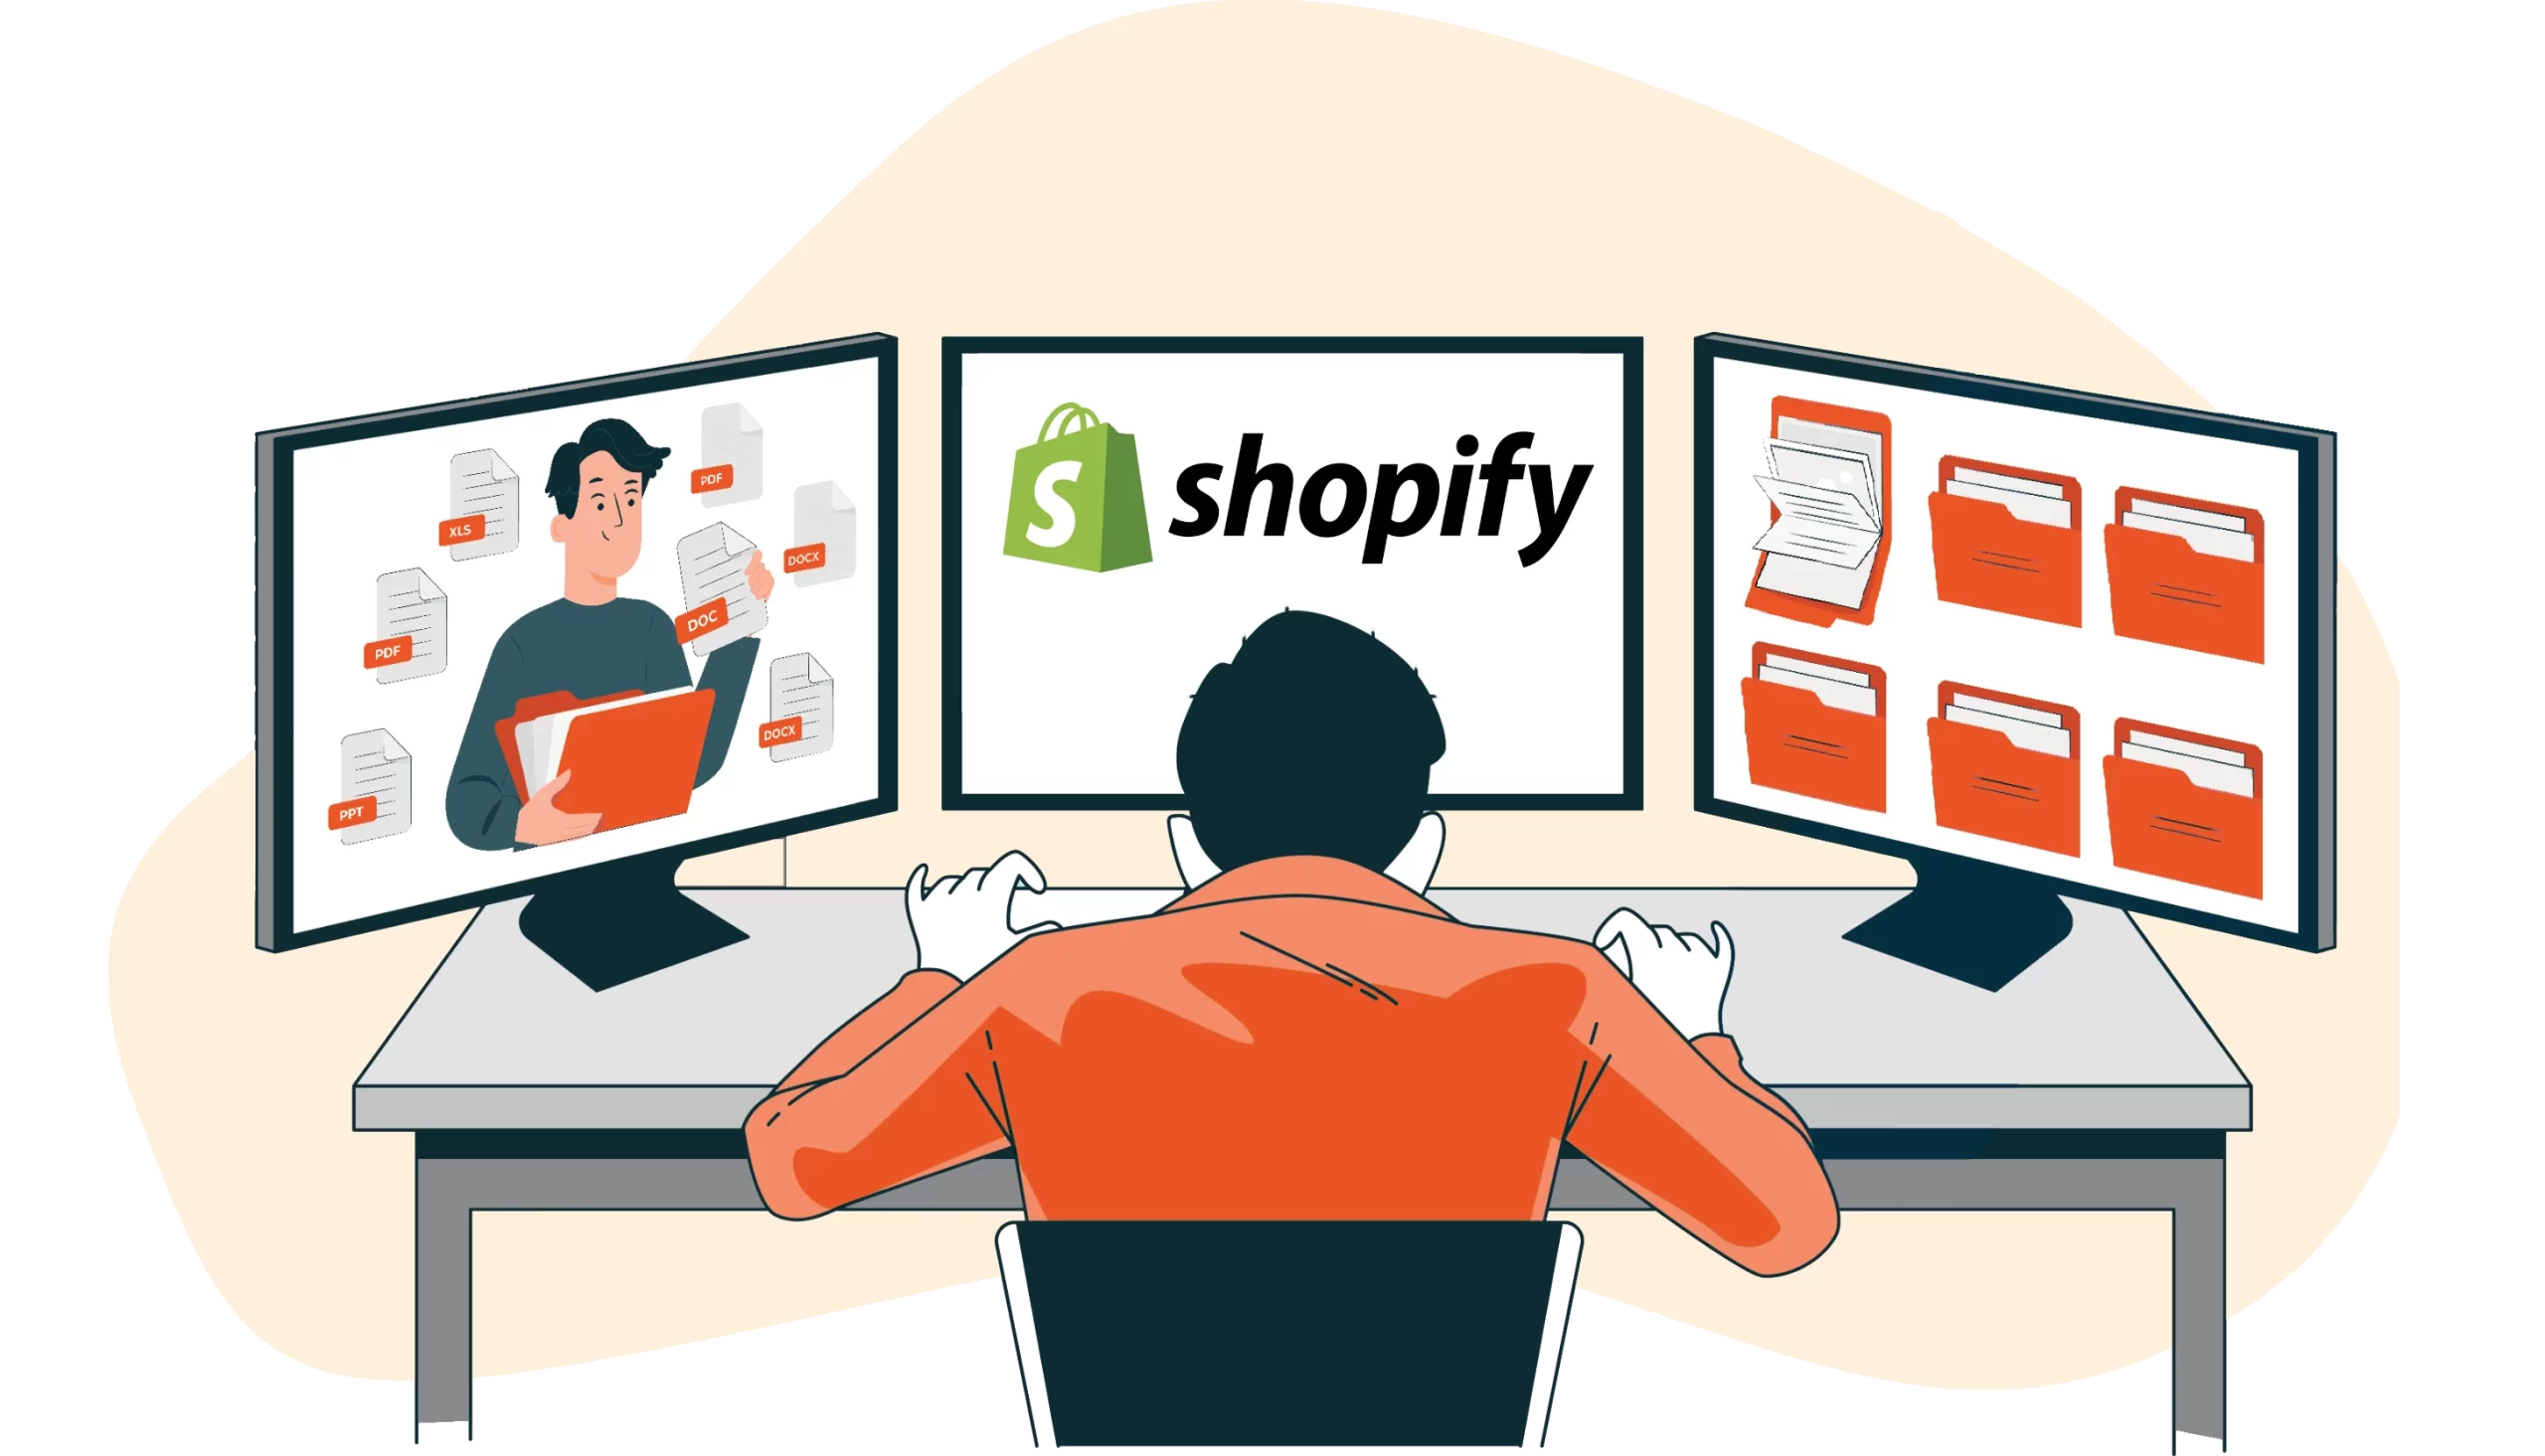 file restriction in your shopify store using shopify file restriction option